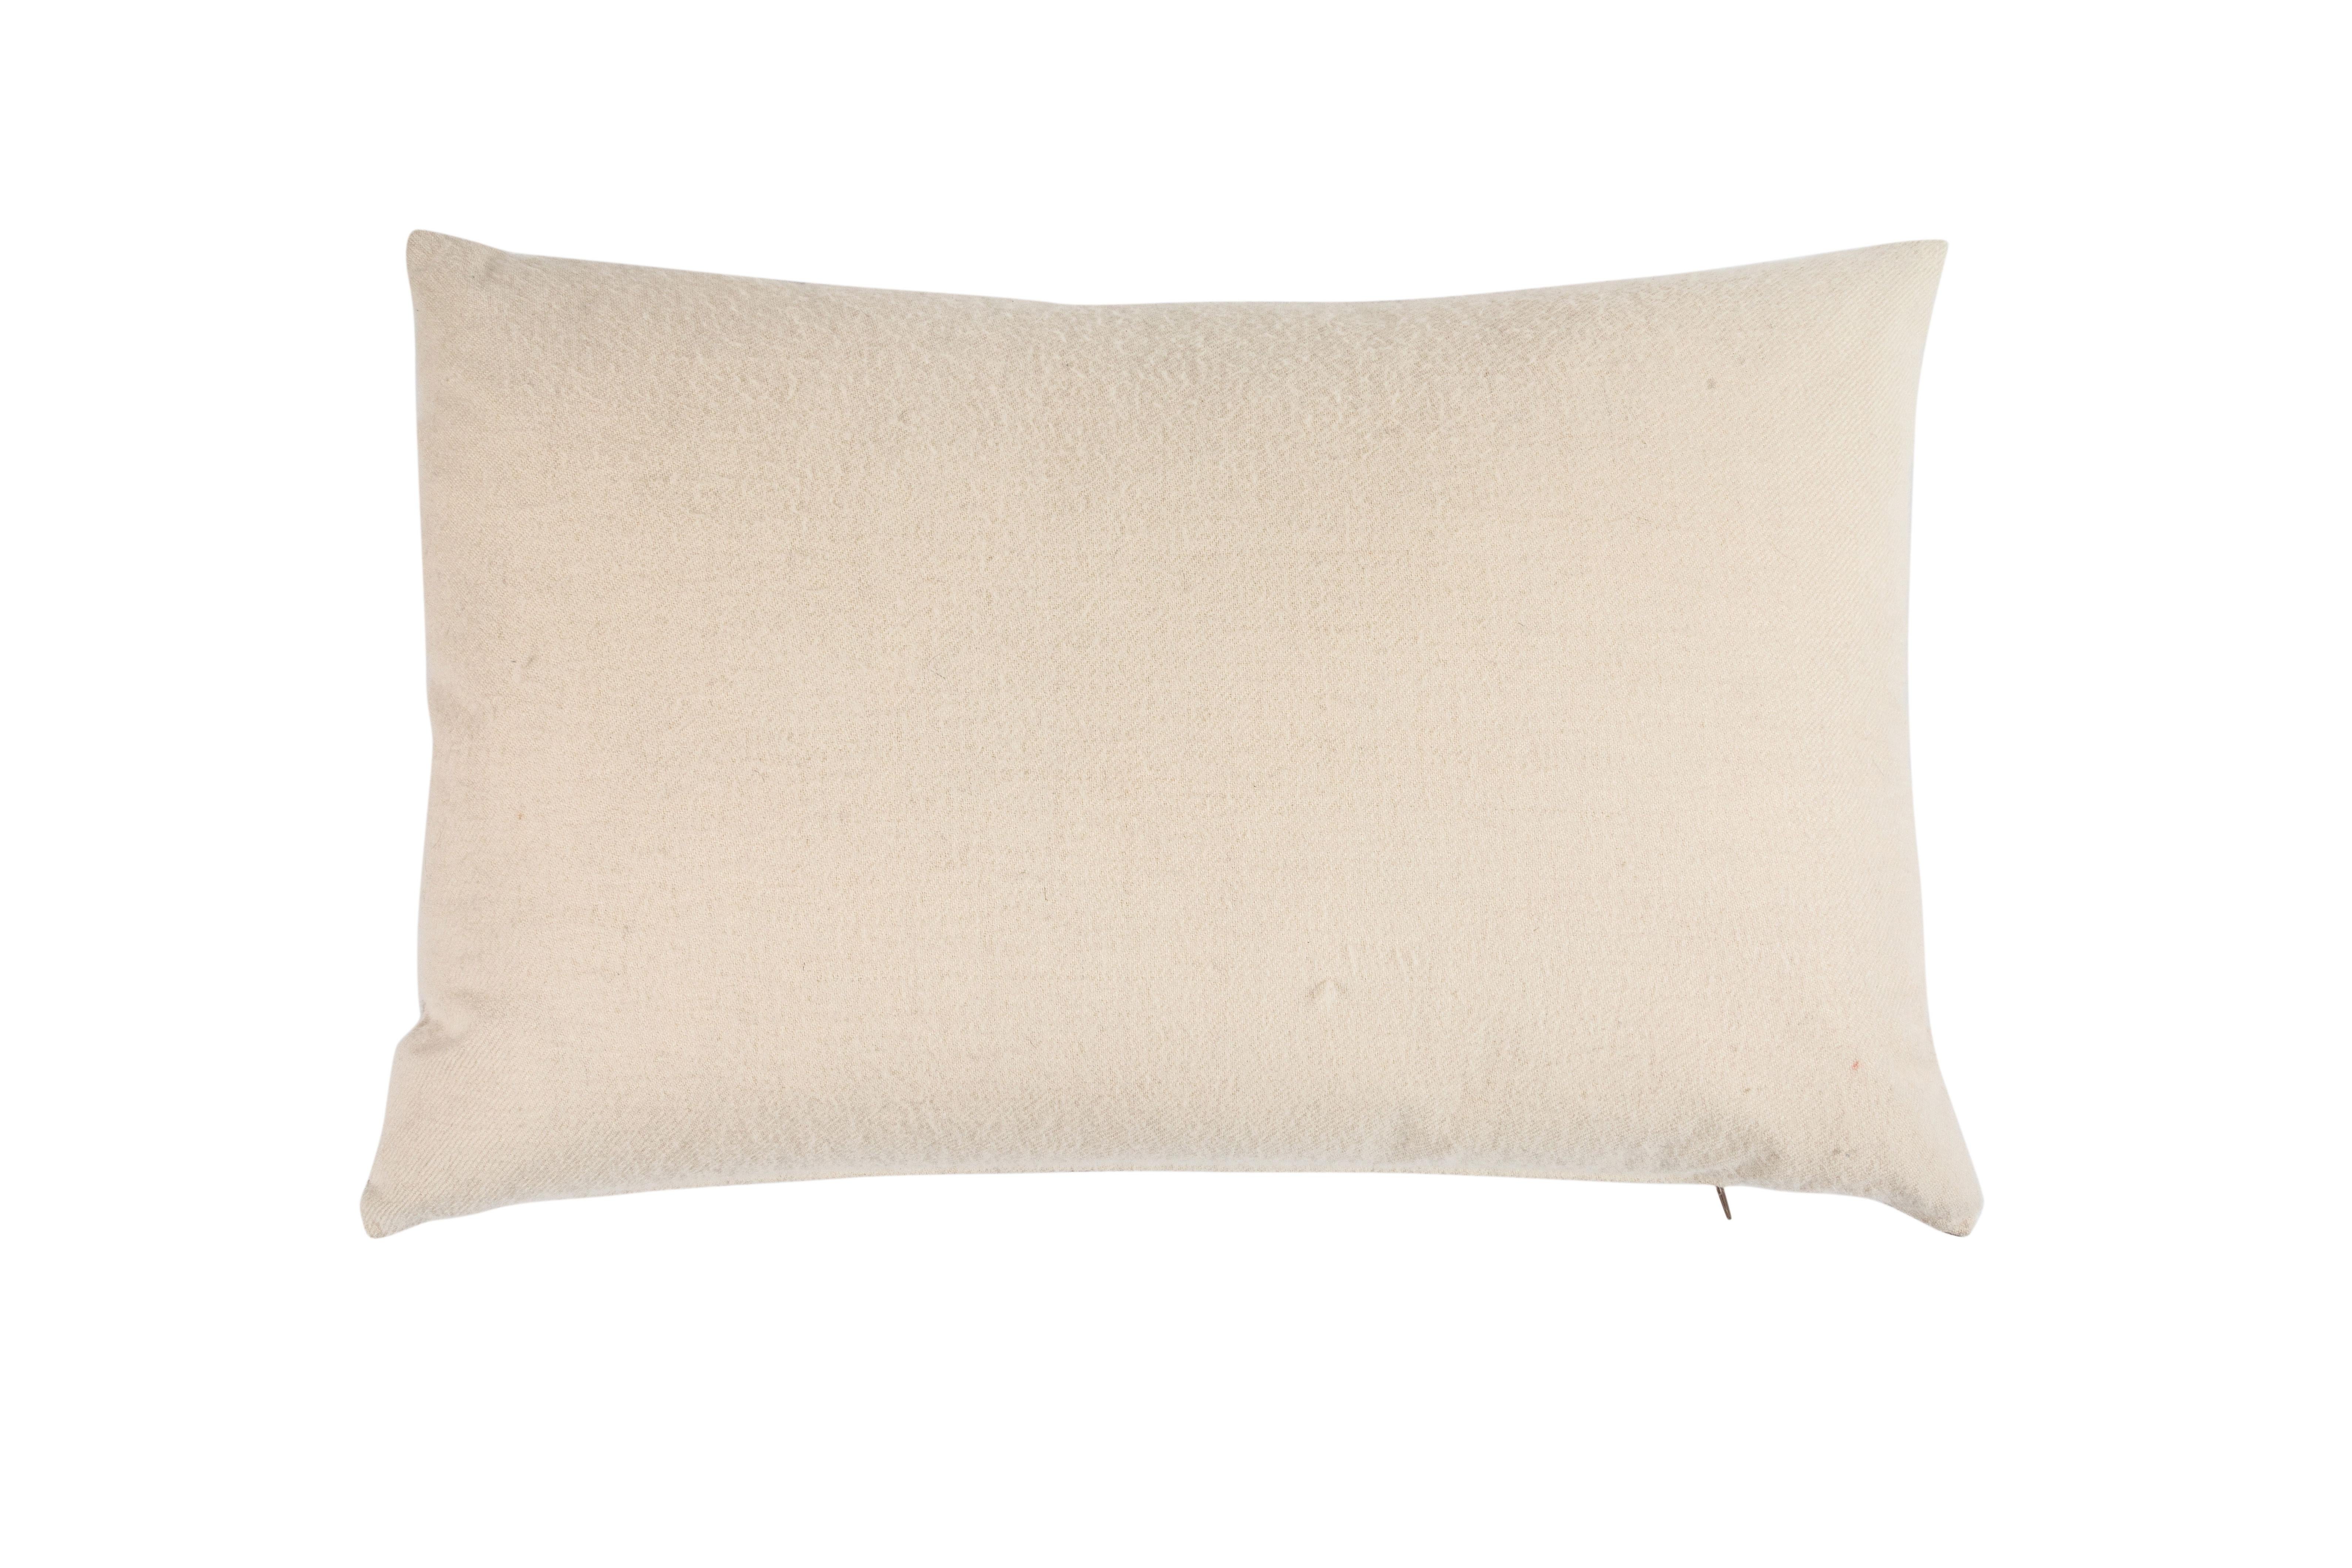 Contemporary Italian cream and putty cashmere lumbar pillow. Removeable zippered cover. 